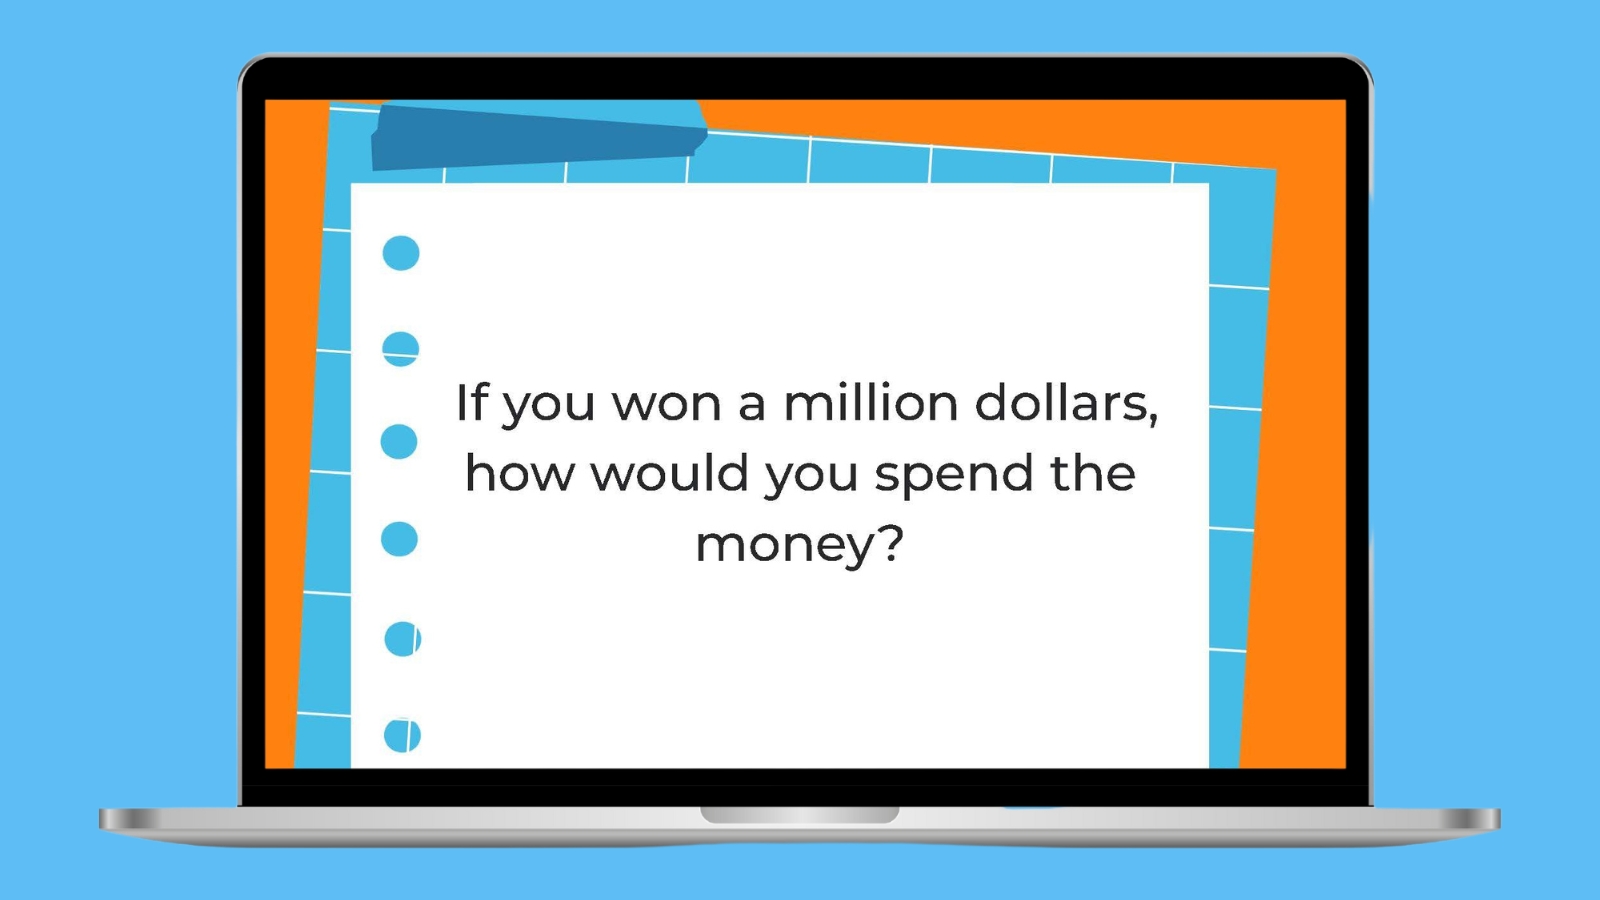 If you won a million dollars, how would you spend the money?